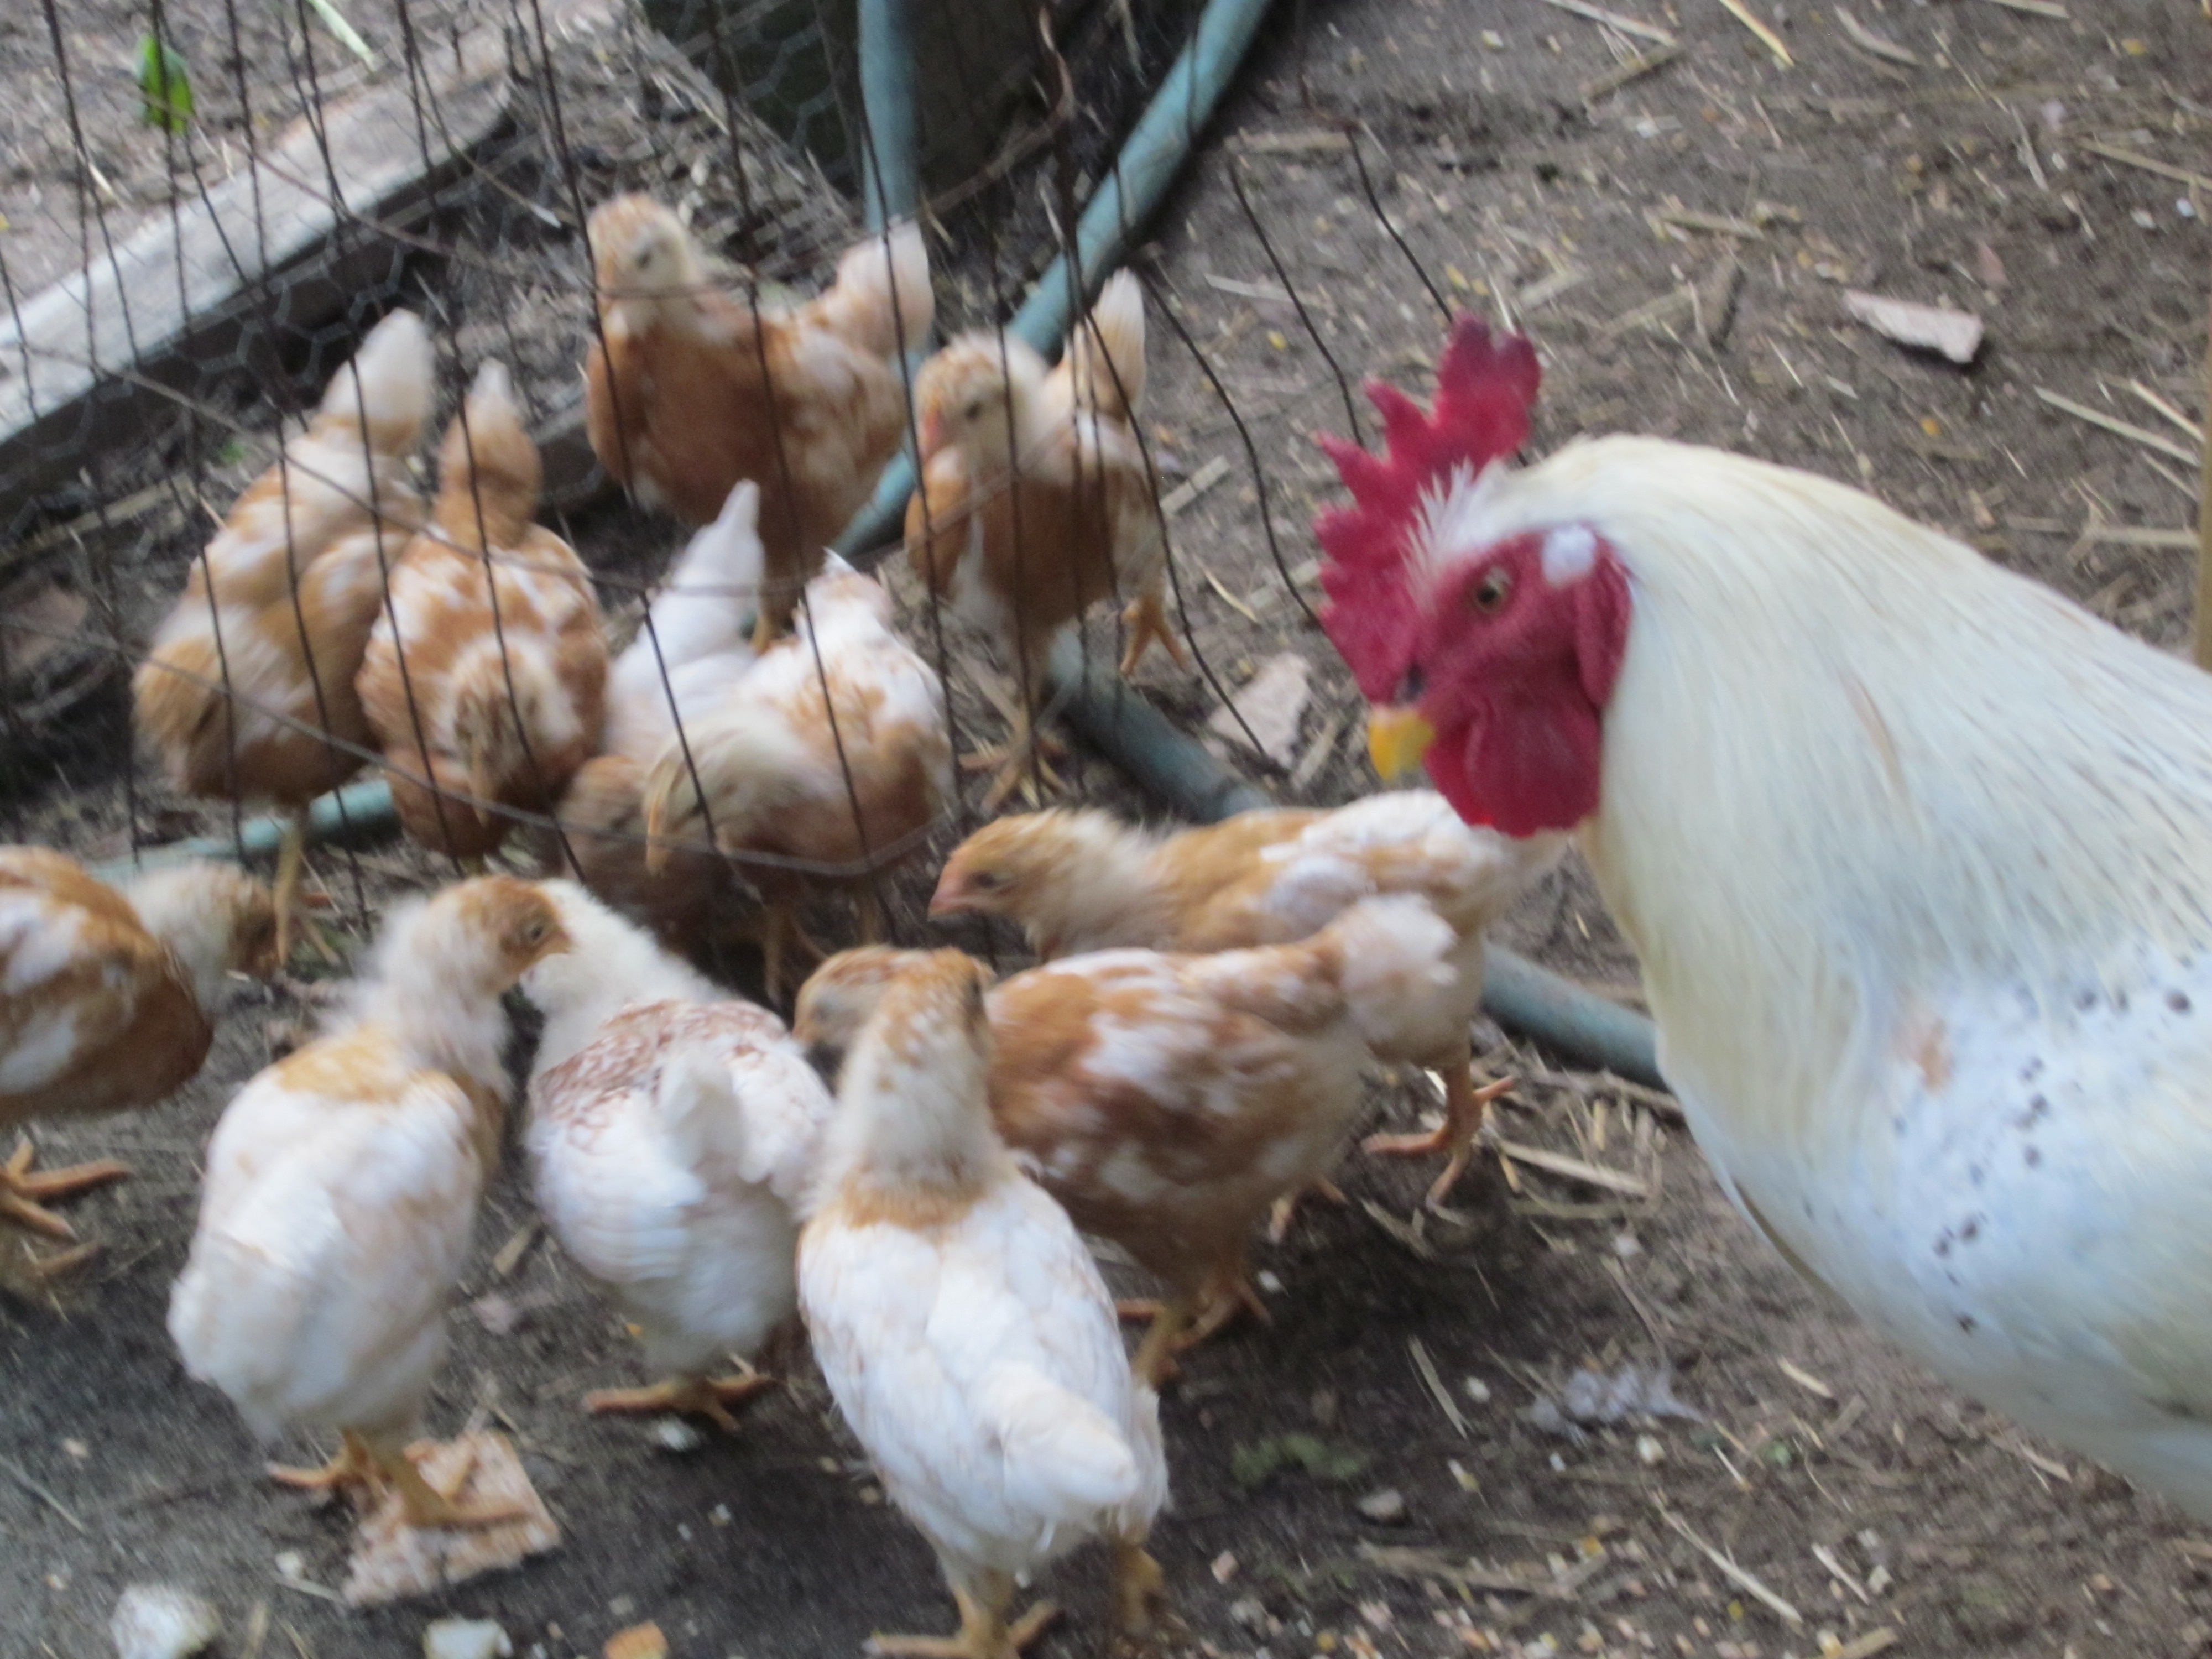 Henry, our sweet 'ol rooster has adopted the baby chicks.  They will be 5 weeks old tomorrow.   Henry tore into a cat who tried to get in the pen with the babies.  I think our other outdoor cats recognize that the chicks are now part of the family.